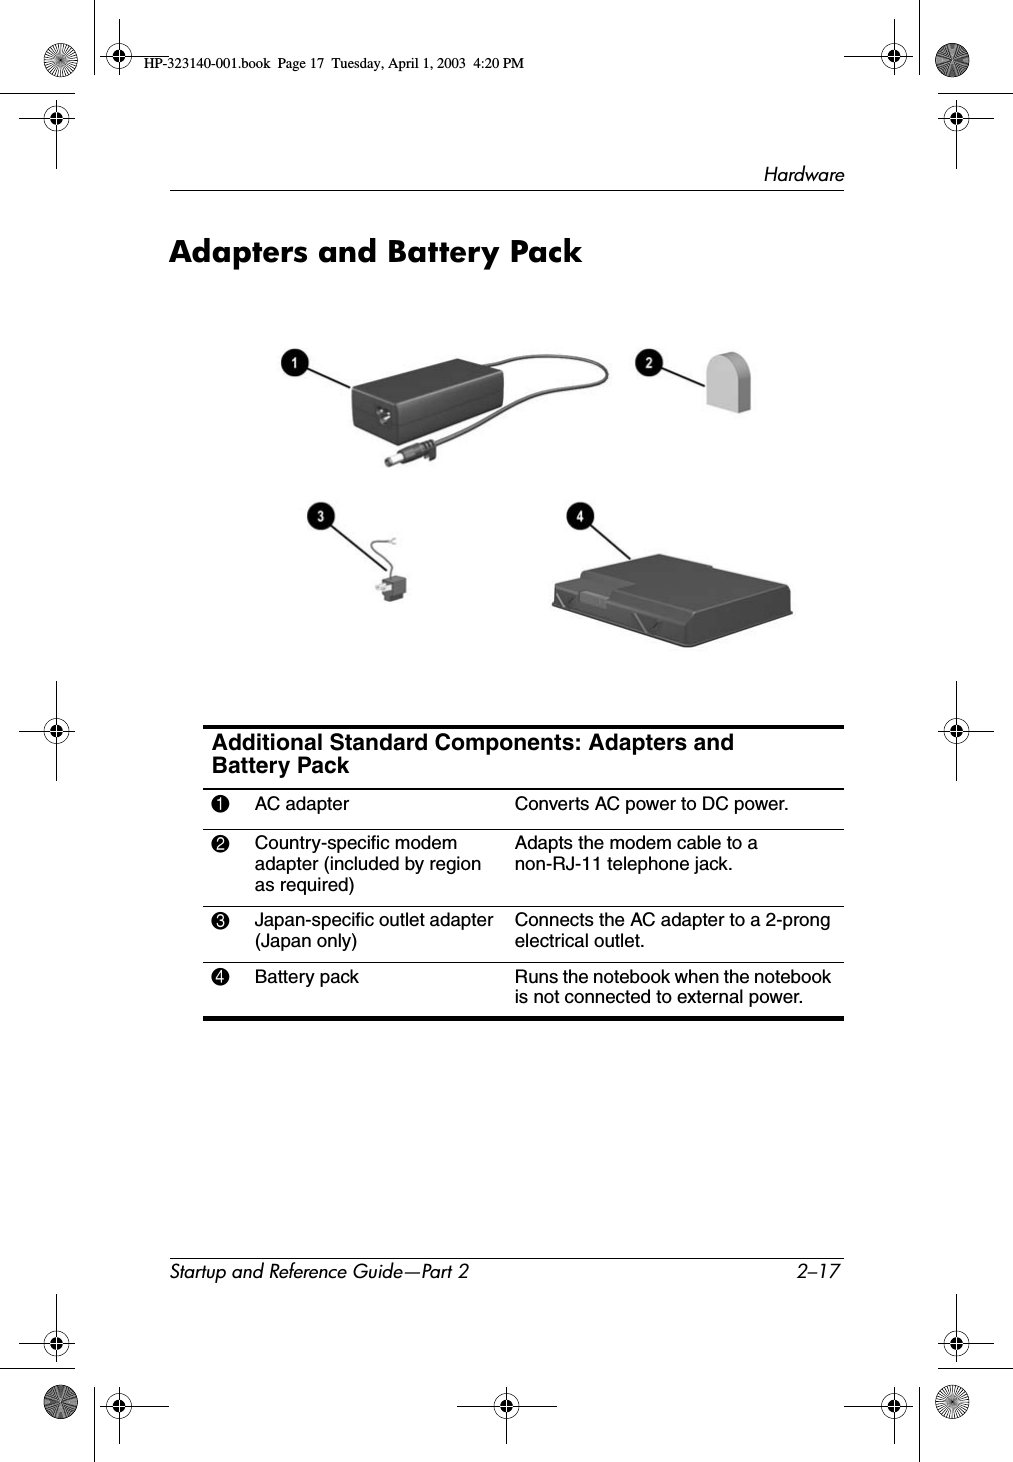 HardwareStartup and Reference Guide—Part 2 2–17Adapters and Battery PackAdditional Standard Components: Adapters and Battery Pack1AC adapter Converts AC power to DC power.2Country-specific modem adapter (included by region as required)Adapts the modem cable to a non-RJ-11 telephone jack.3Japan-specific outlet adapter (Japan only)Connects the AC adapter to a 2-prong electrical outlet.4Battery pack  Runs the notebook when the notebook is not connected to external power.HP-323140-001.book  Page 17  Tuesday, April 1, 2003  4:20 PM